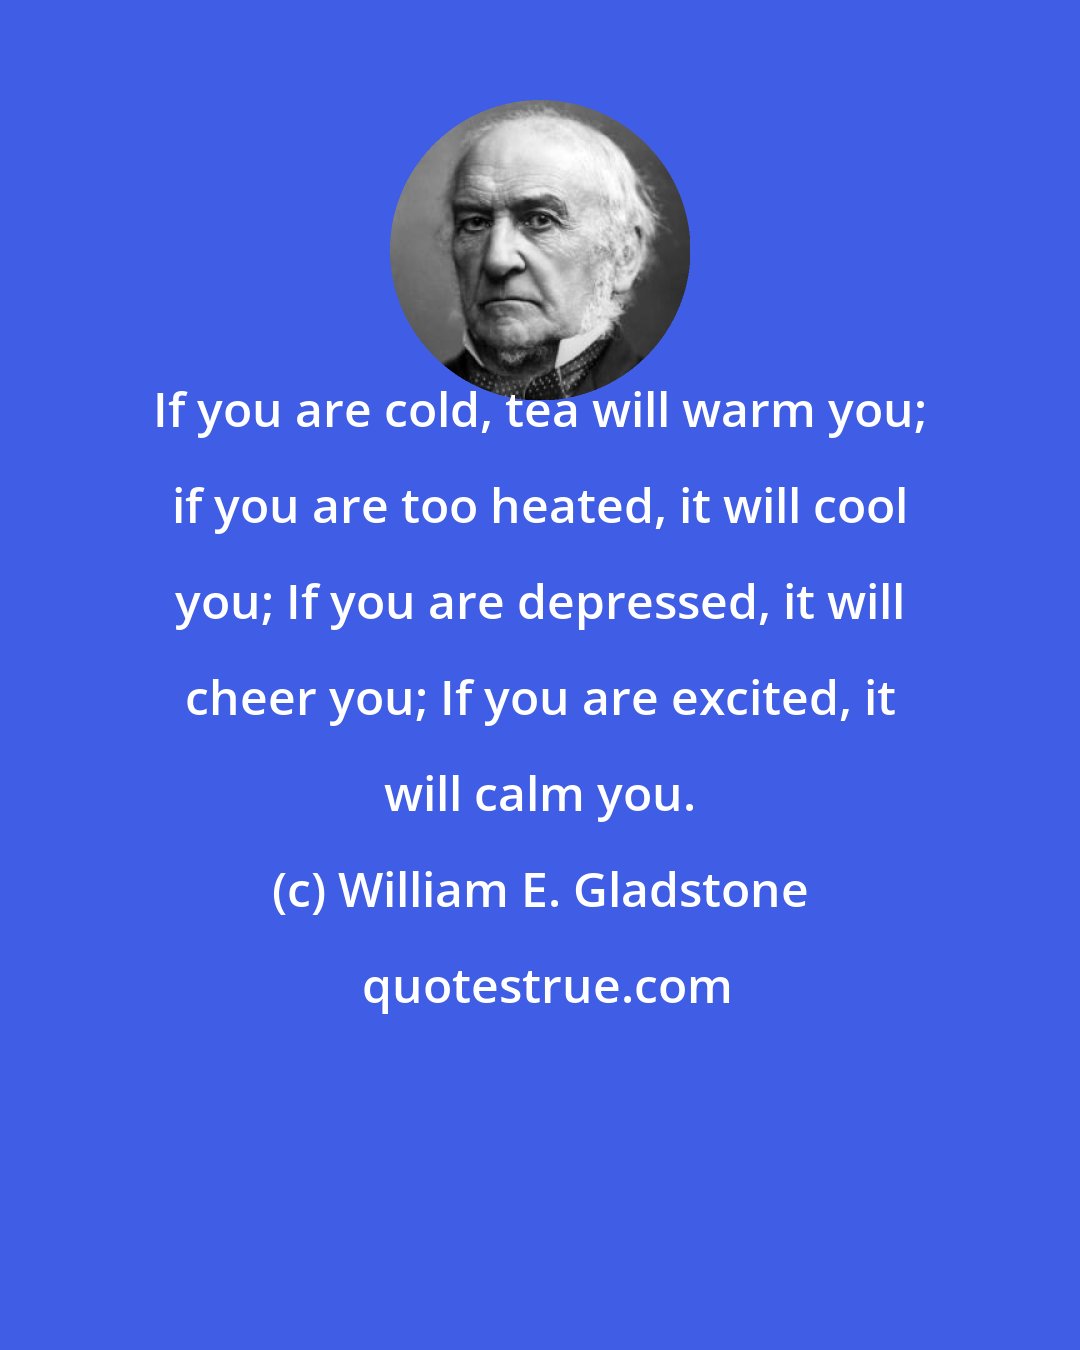 William E. Gladstone: If you are cold, tea will warm you; if you are too heated, it will cool you; If you are depressed, it will cheer you; If you are excited, it will calm you.